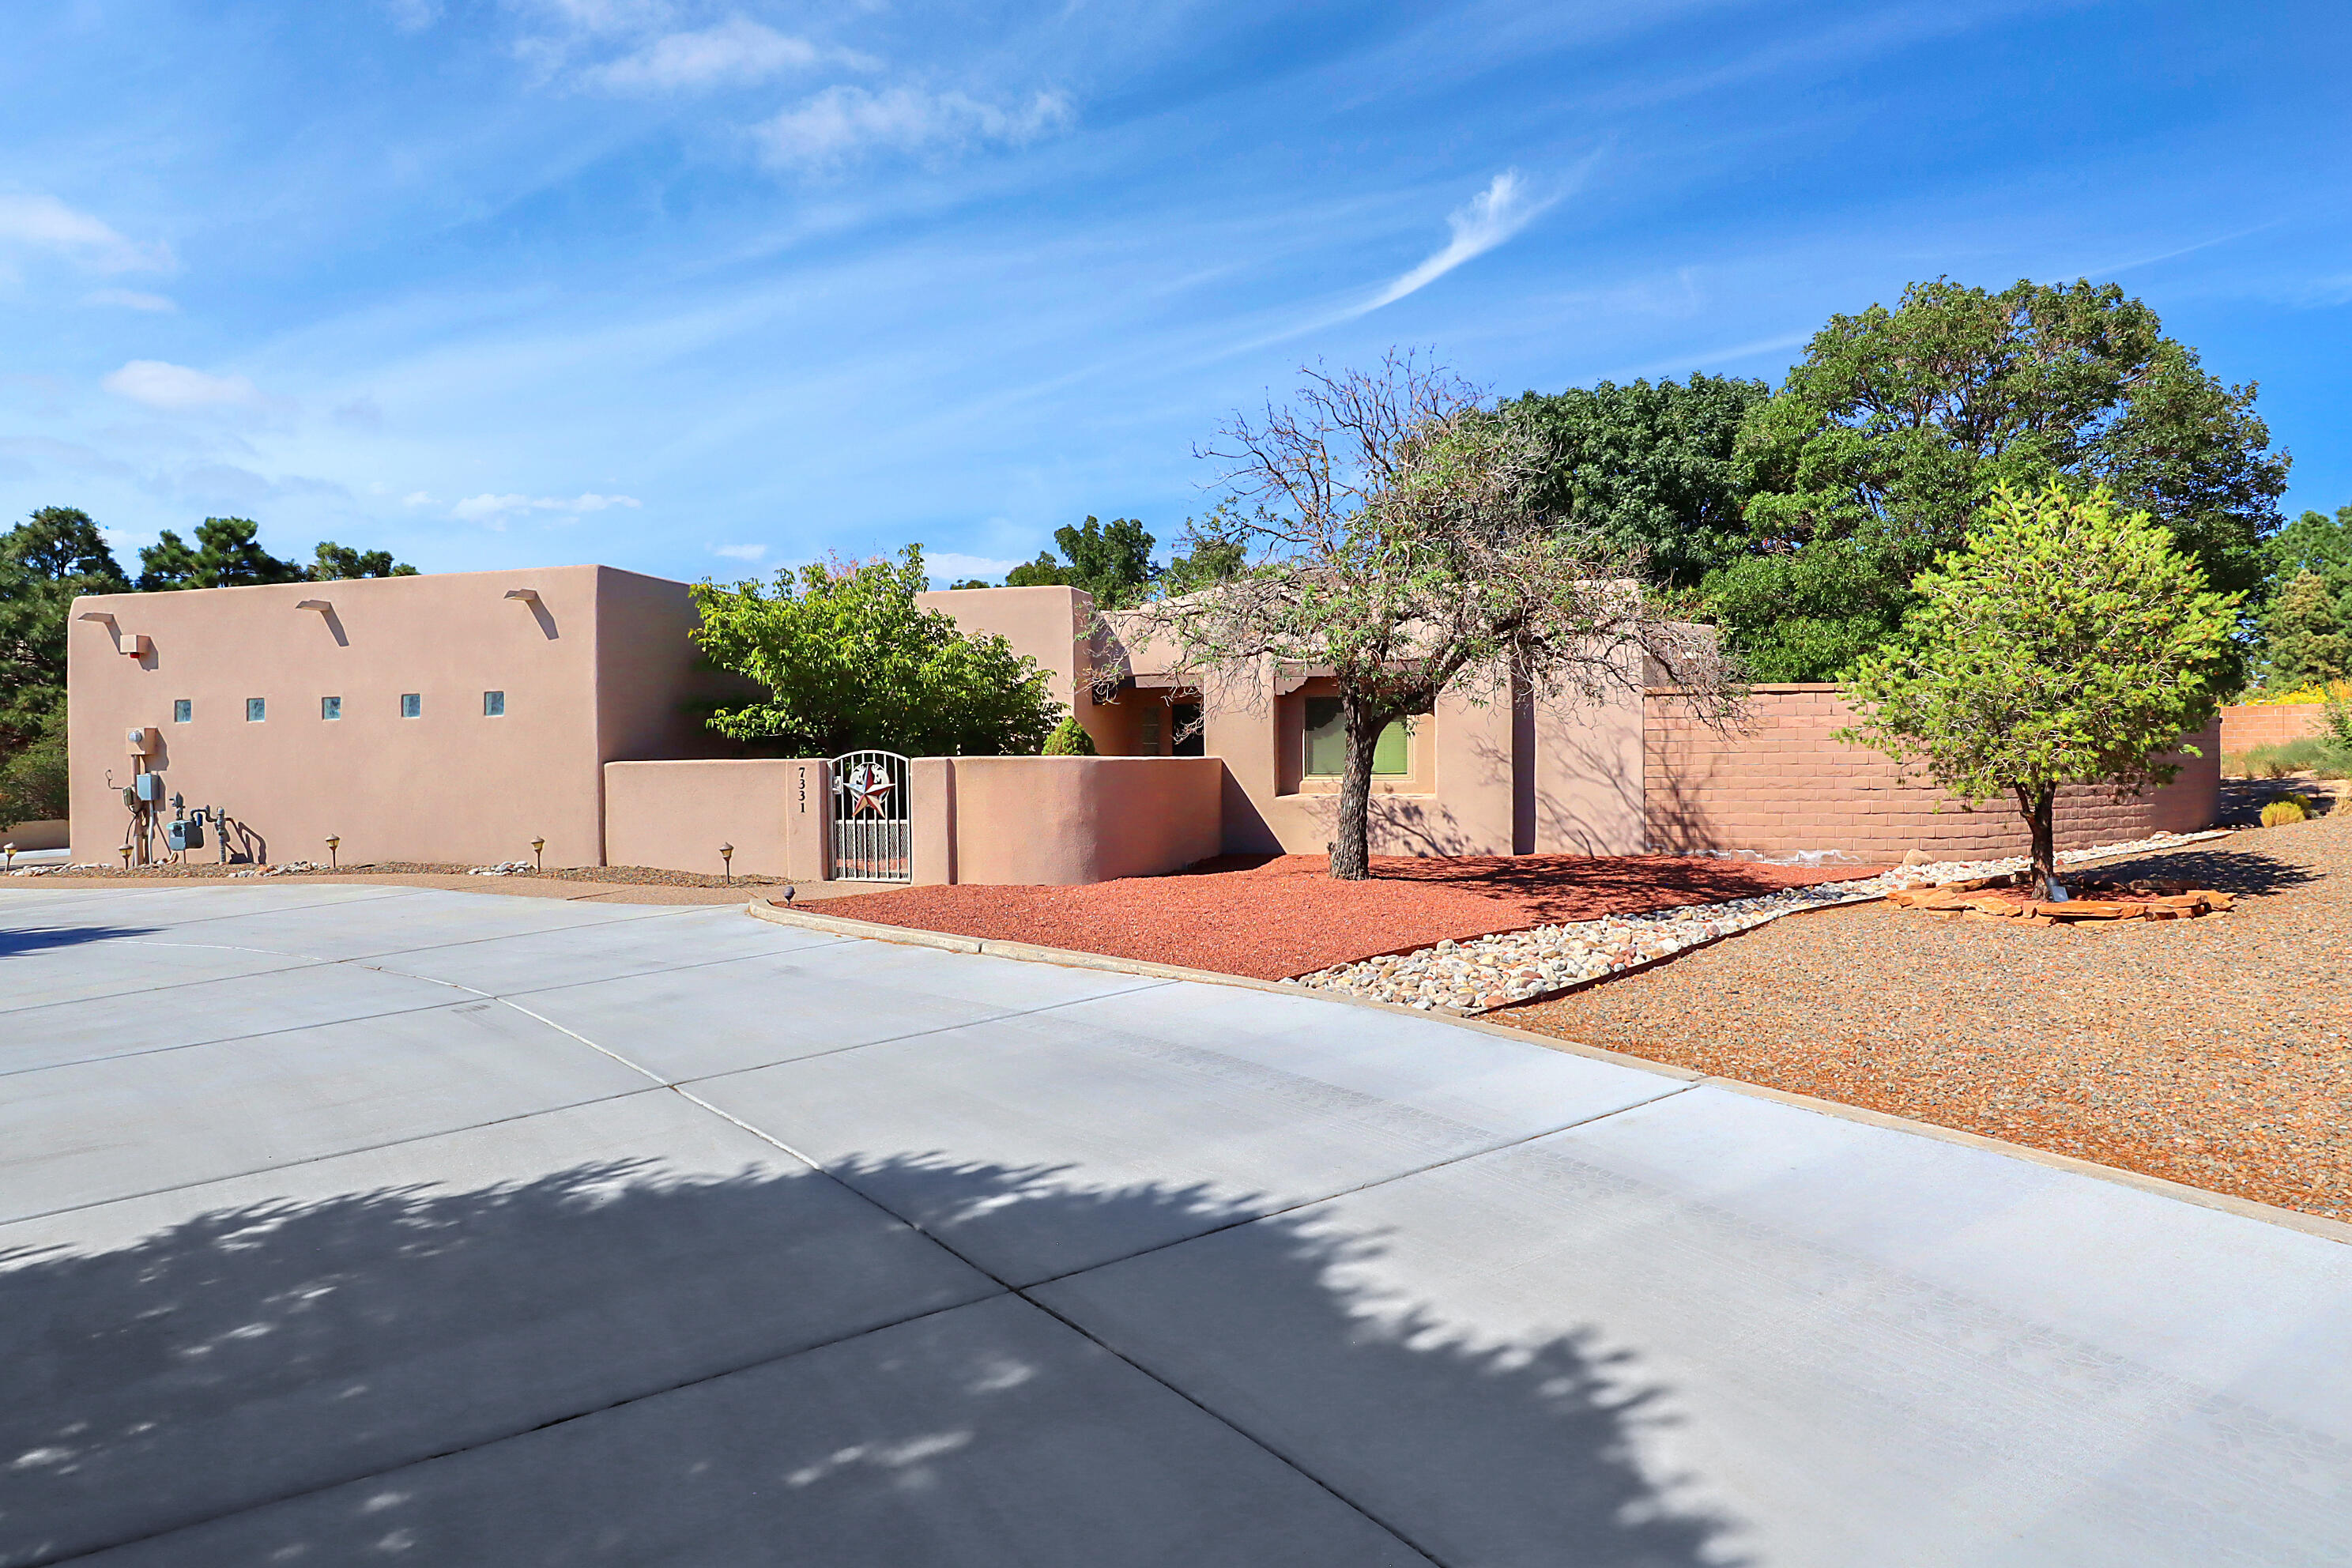 This stunning single-level custom home with heated pool sits on a .89 acre lot in North Albuquerque Acres West.  At 2607 sq ft, this cozy home features 3 bedrooms, 2.5 baths, 3 car garage, and a fabulous office with custom built in book shelves.  The lush backyard oasis includes a covered patio, swimming pool, hot tub, gas grille, and fire-pit sitting under jaw-dropping views of the Sandia Mountains!  Oversized circular driveway and extended parking provide room for several vehicles, RV or other fun toys.  This property is on a septic and shared well.  You cannot fully appreciate the amazing backyard and views unless you see it in person.  Schedule a viewing today!!!